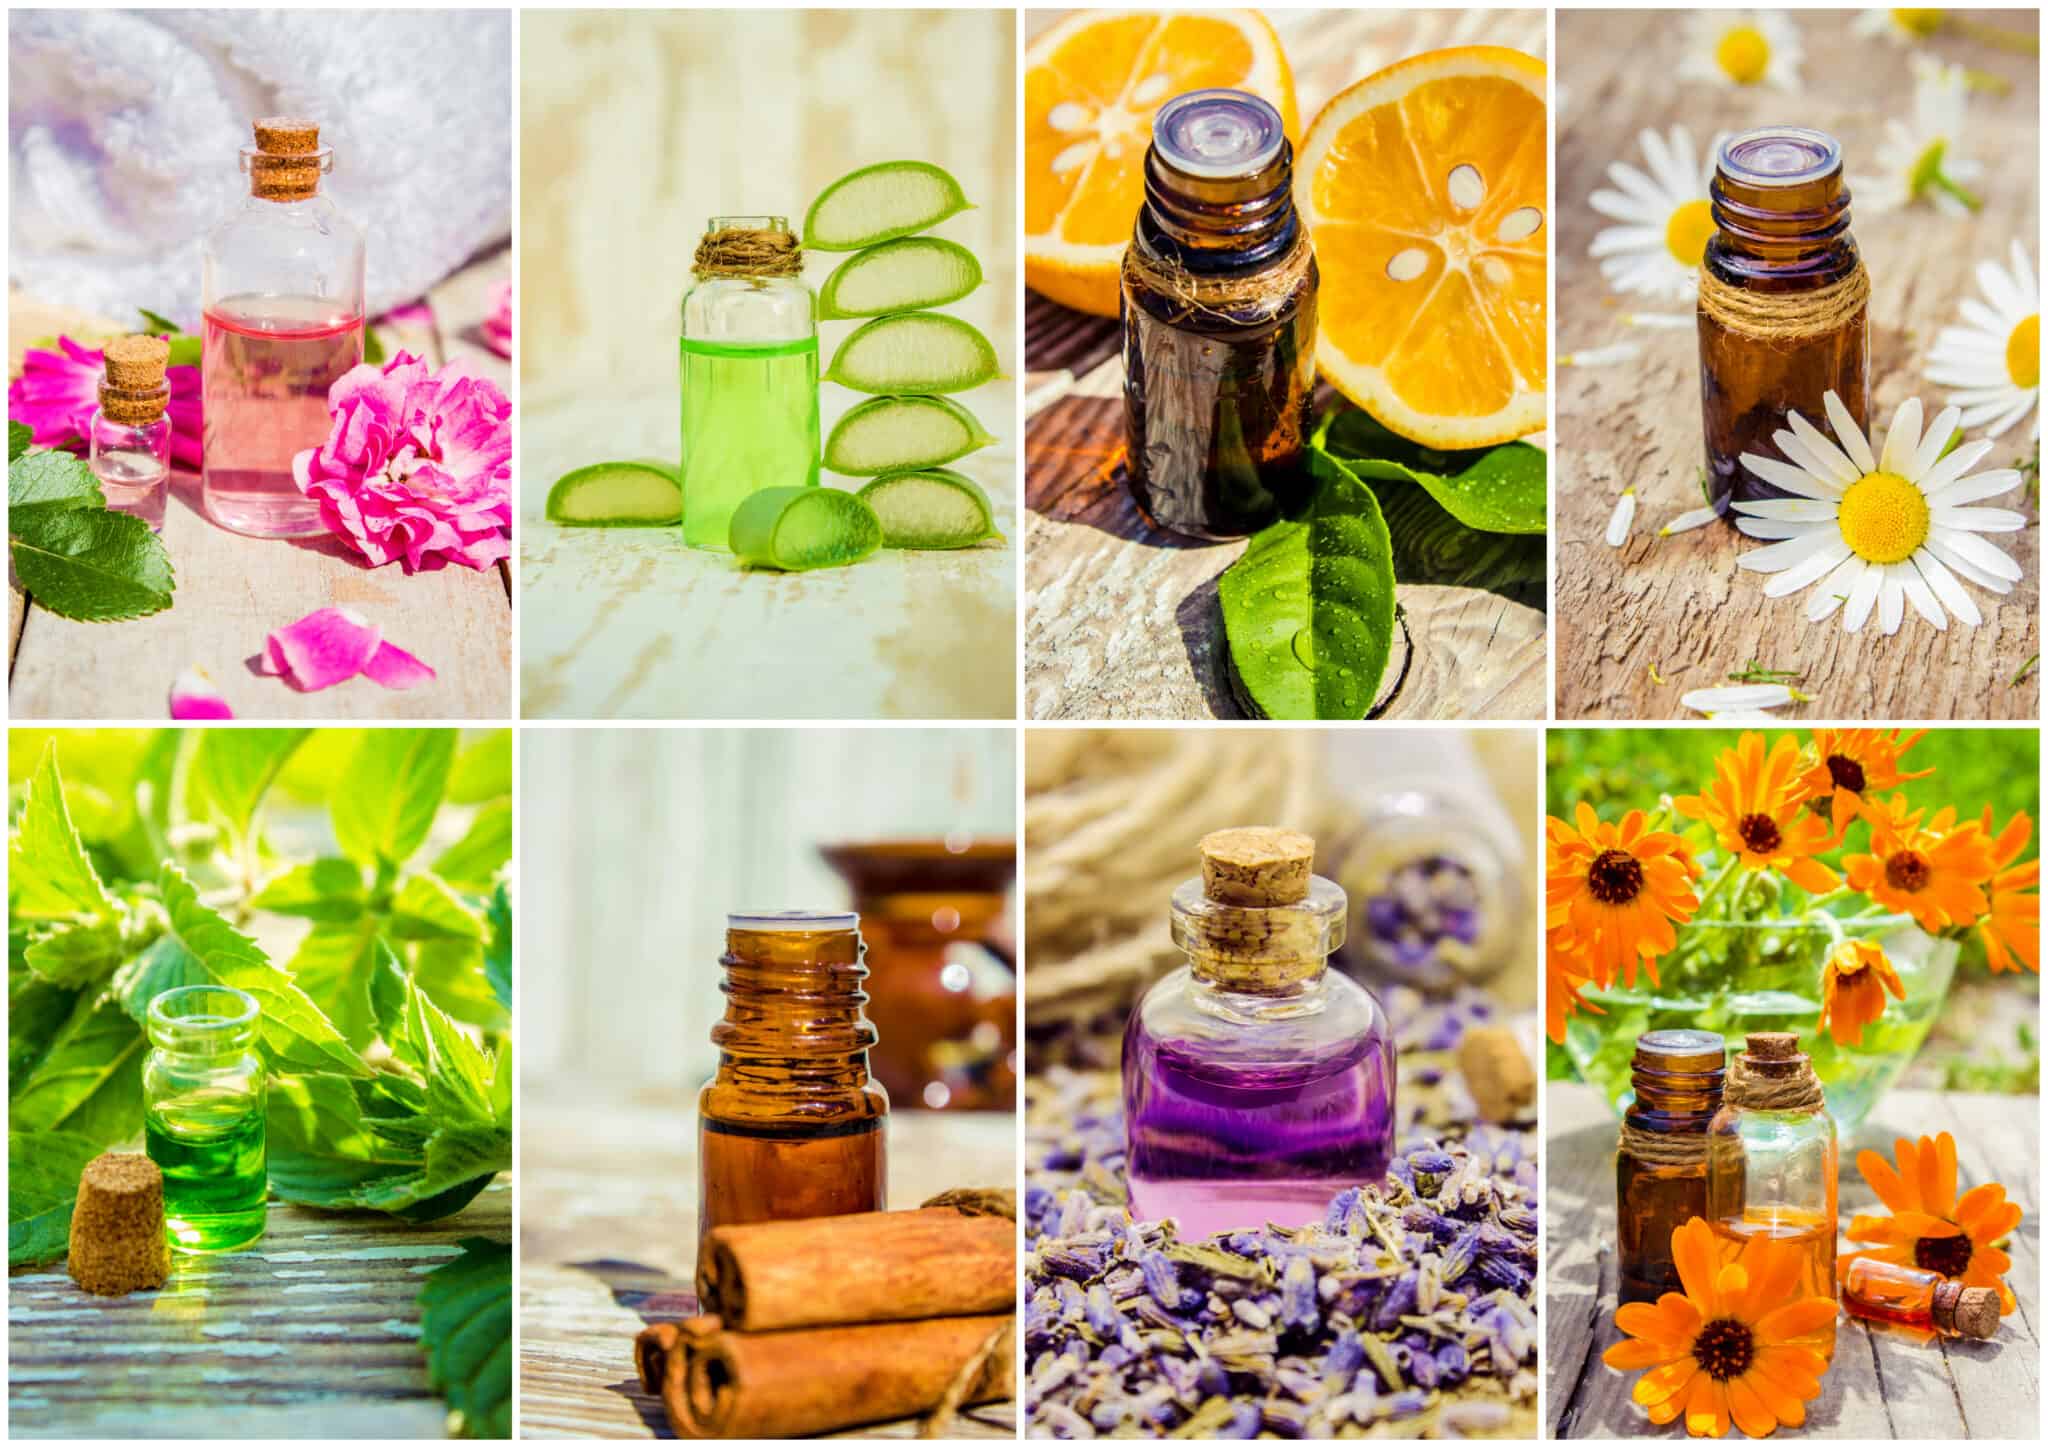 8 Ways On How To Use Essential Oils For Maximum Health Benefits!